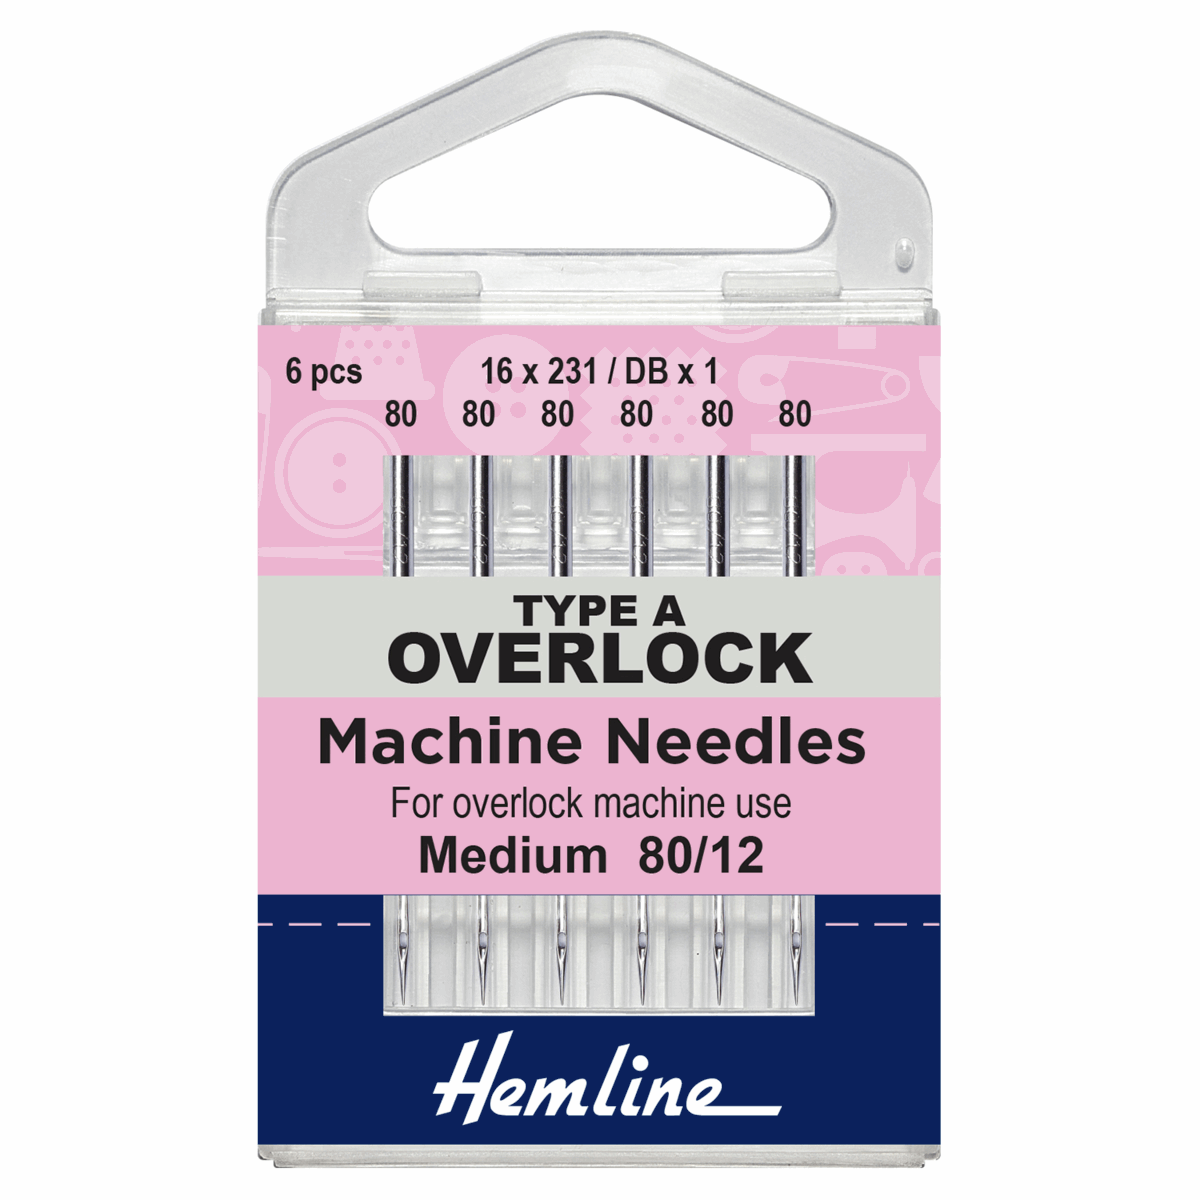 H107.A Overlock Machine Needle - For needle system 16x231 or DBx1 - Size 80/12 